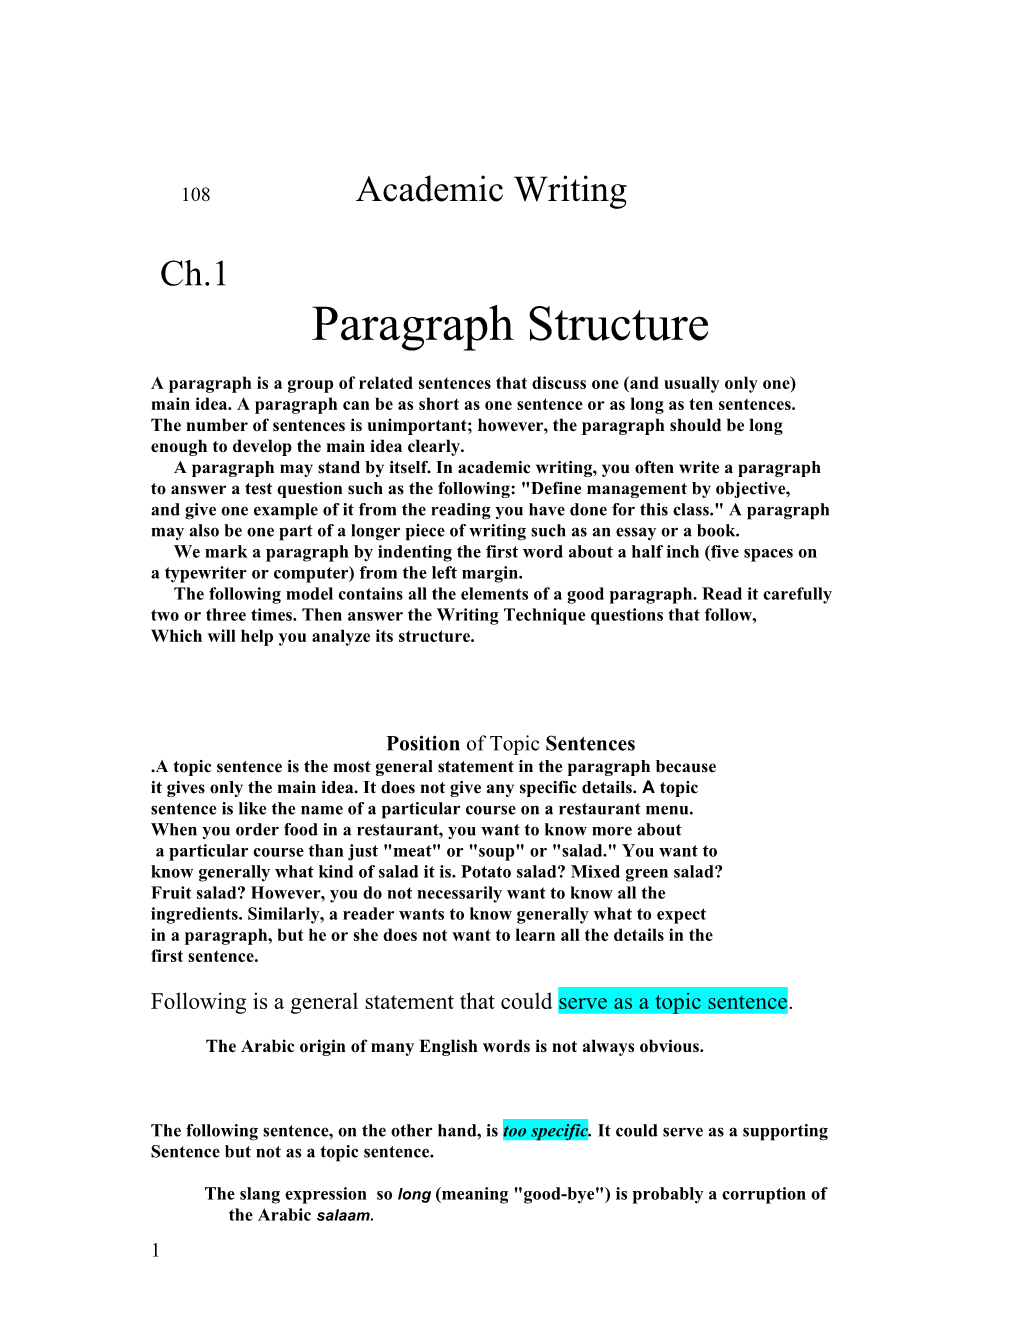 A Paragraph Is a Group of Related Sentences That Discuss One (And Usually Only One)